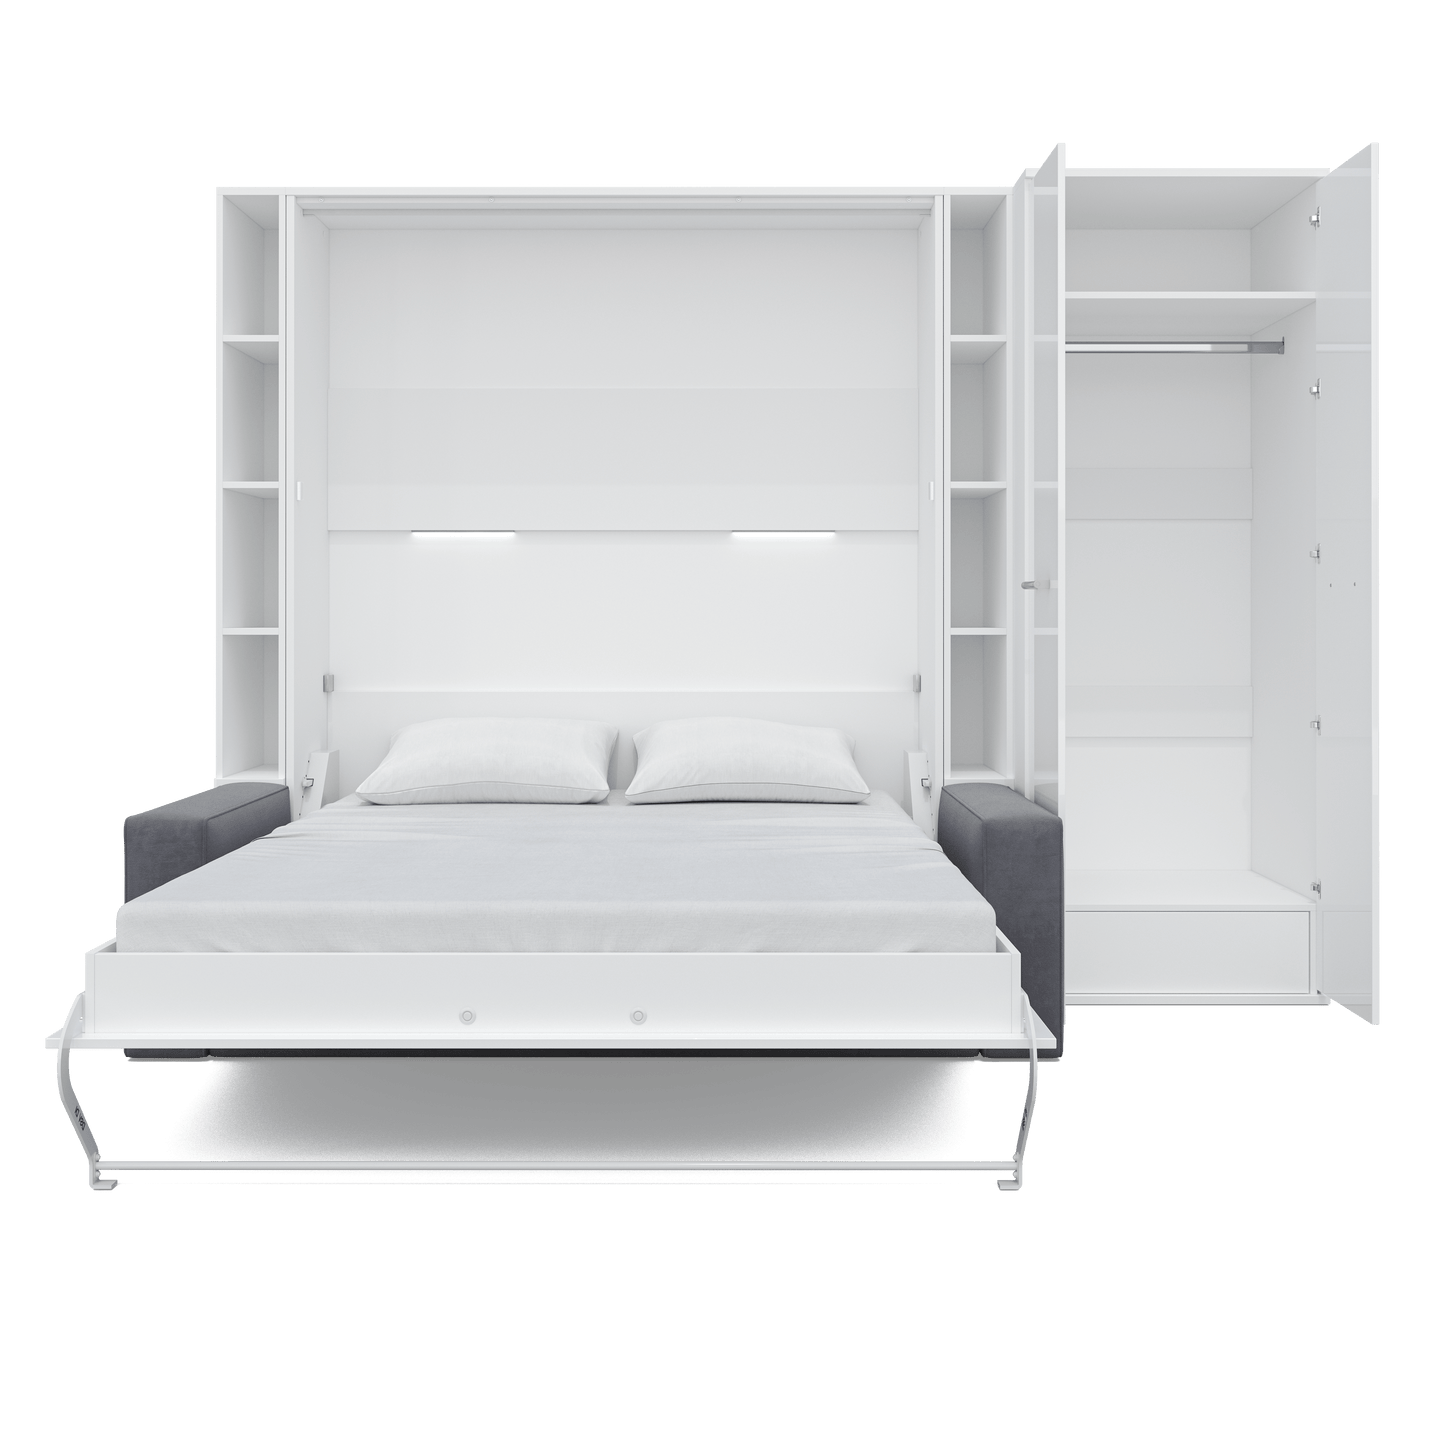 Maxima House Maxima House Vertical Queen size Murphy Bed Invento with a Sofa, two Cabinets and Wardrobe